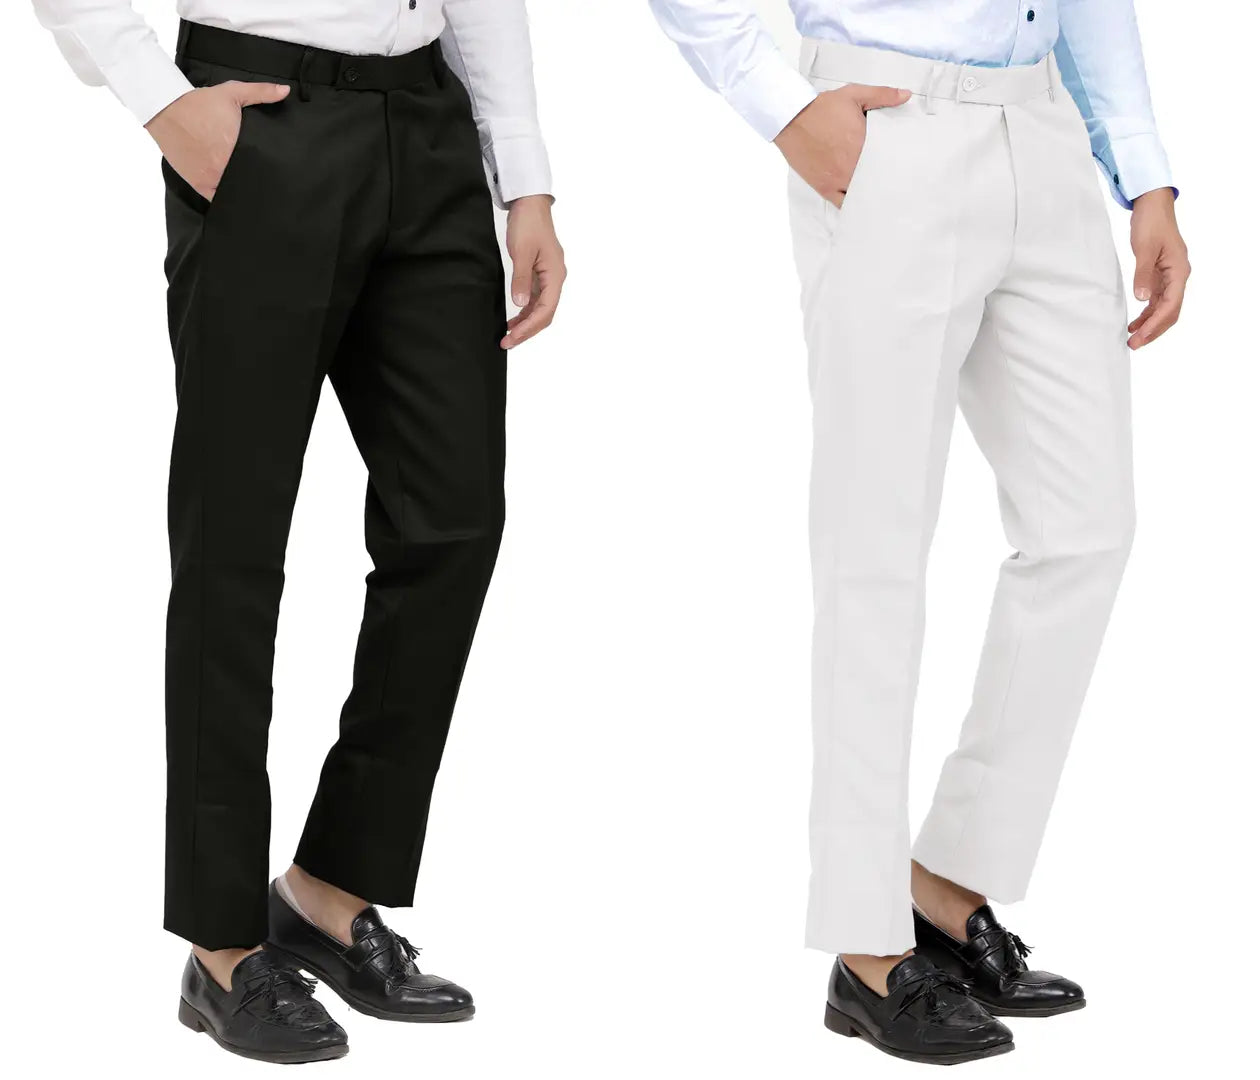 Kundan Men Poly-Viscose Blended Black and White Formal Trousers ( Pack of 2 Trousers )